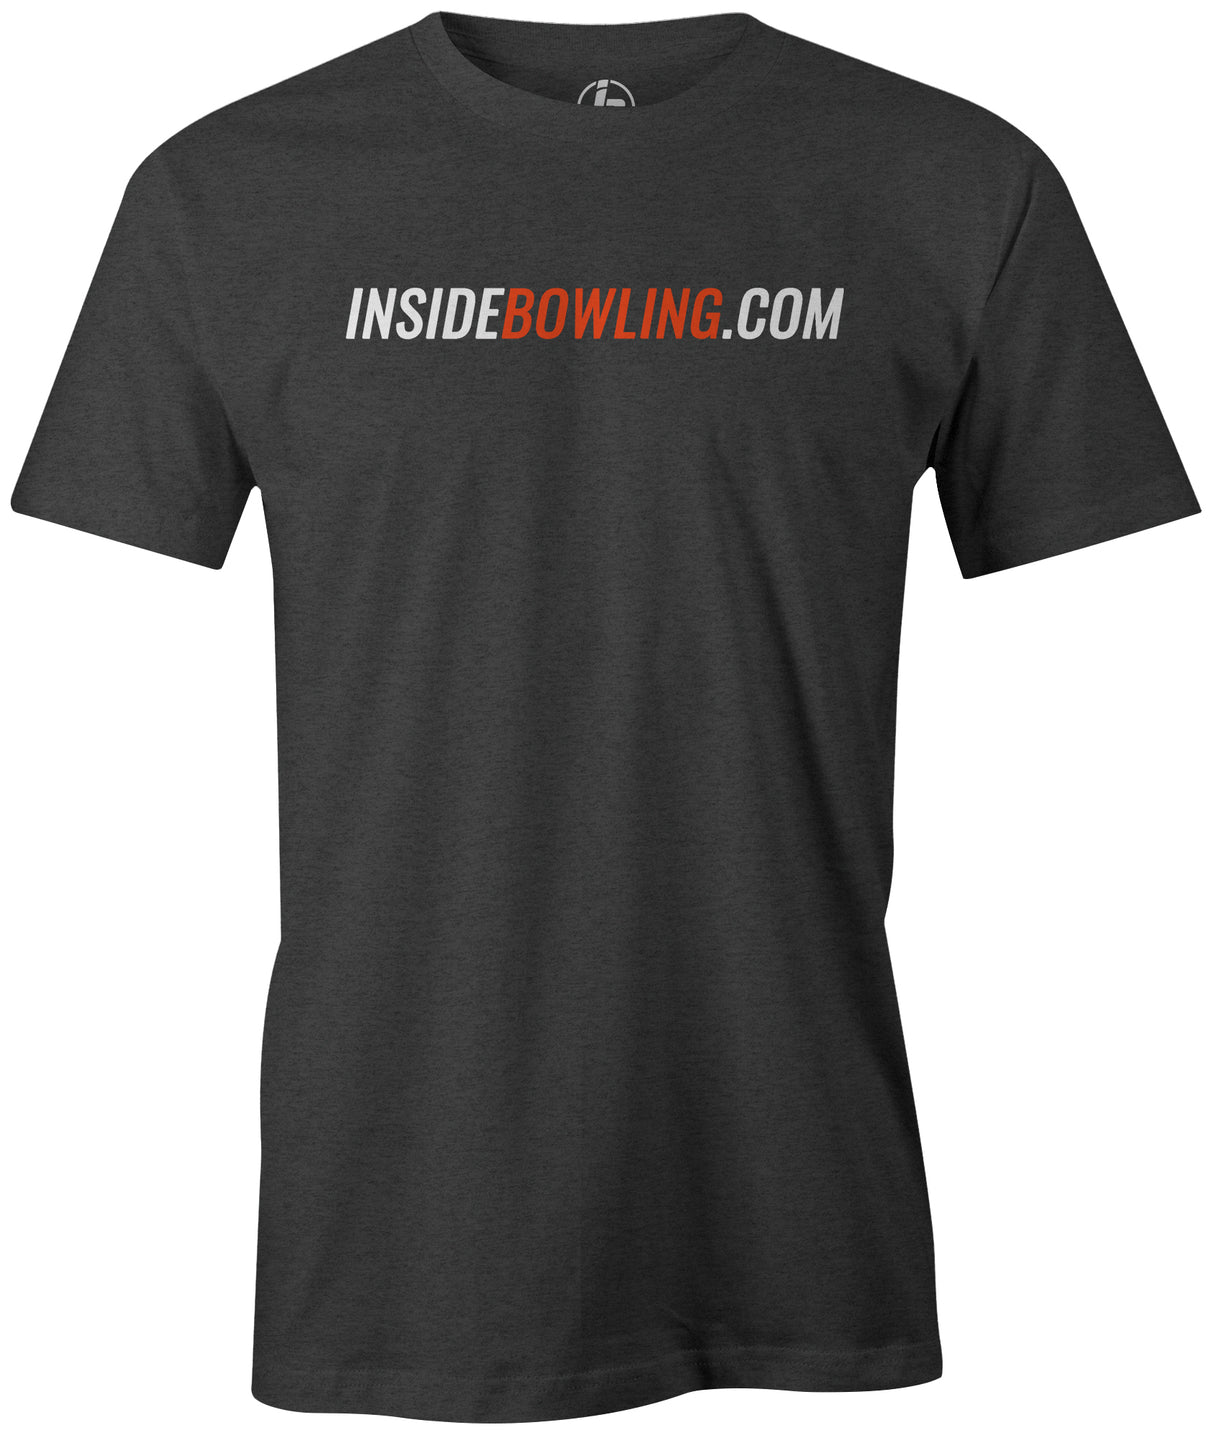 We appreciate the support you give to us! Enjoy this Inside Bowling classic logo tee at a special price! Hit the lanes in this awesome Inside Bowling T-shirt and be a part of the team! League bowling Team shirt. Junior Gold. PBA. PWBA. tee, tee shirt, tee-shirt, tshirt, t shirt, tournament shirt. Cool, novelty. Men's. 